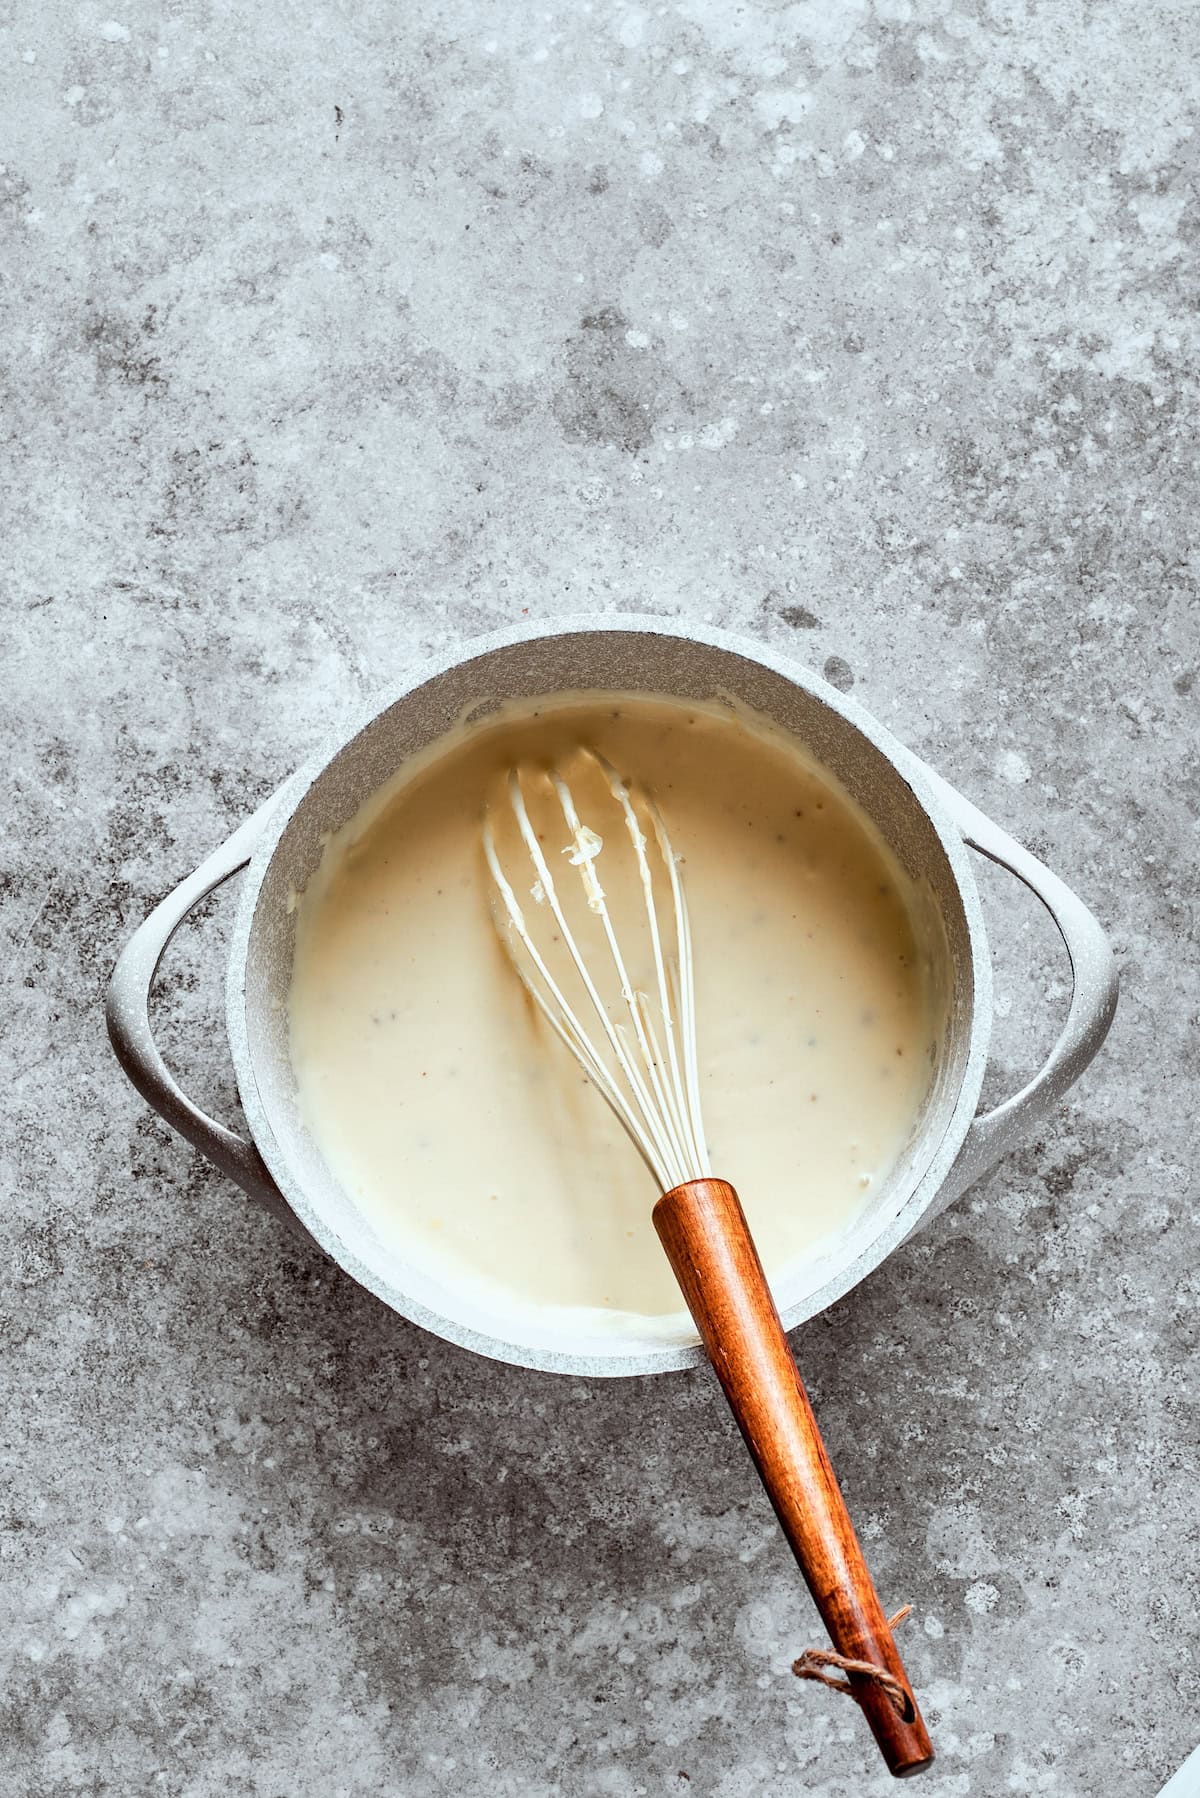 A whisk blends the sauce in a bowl.